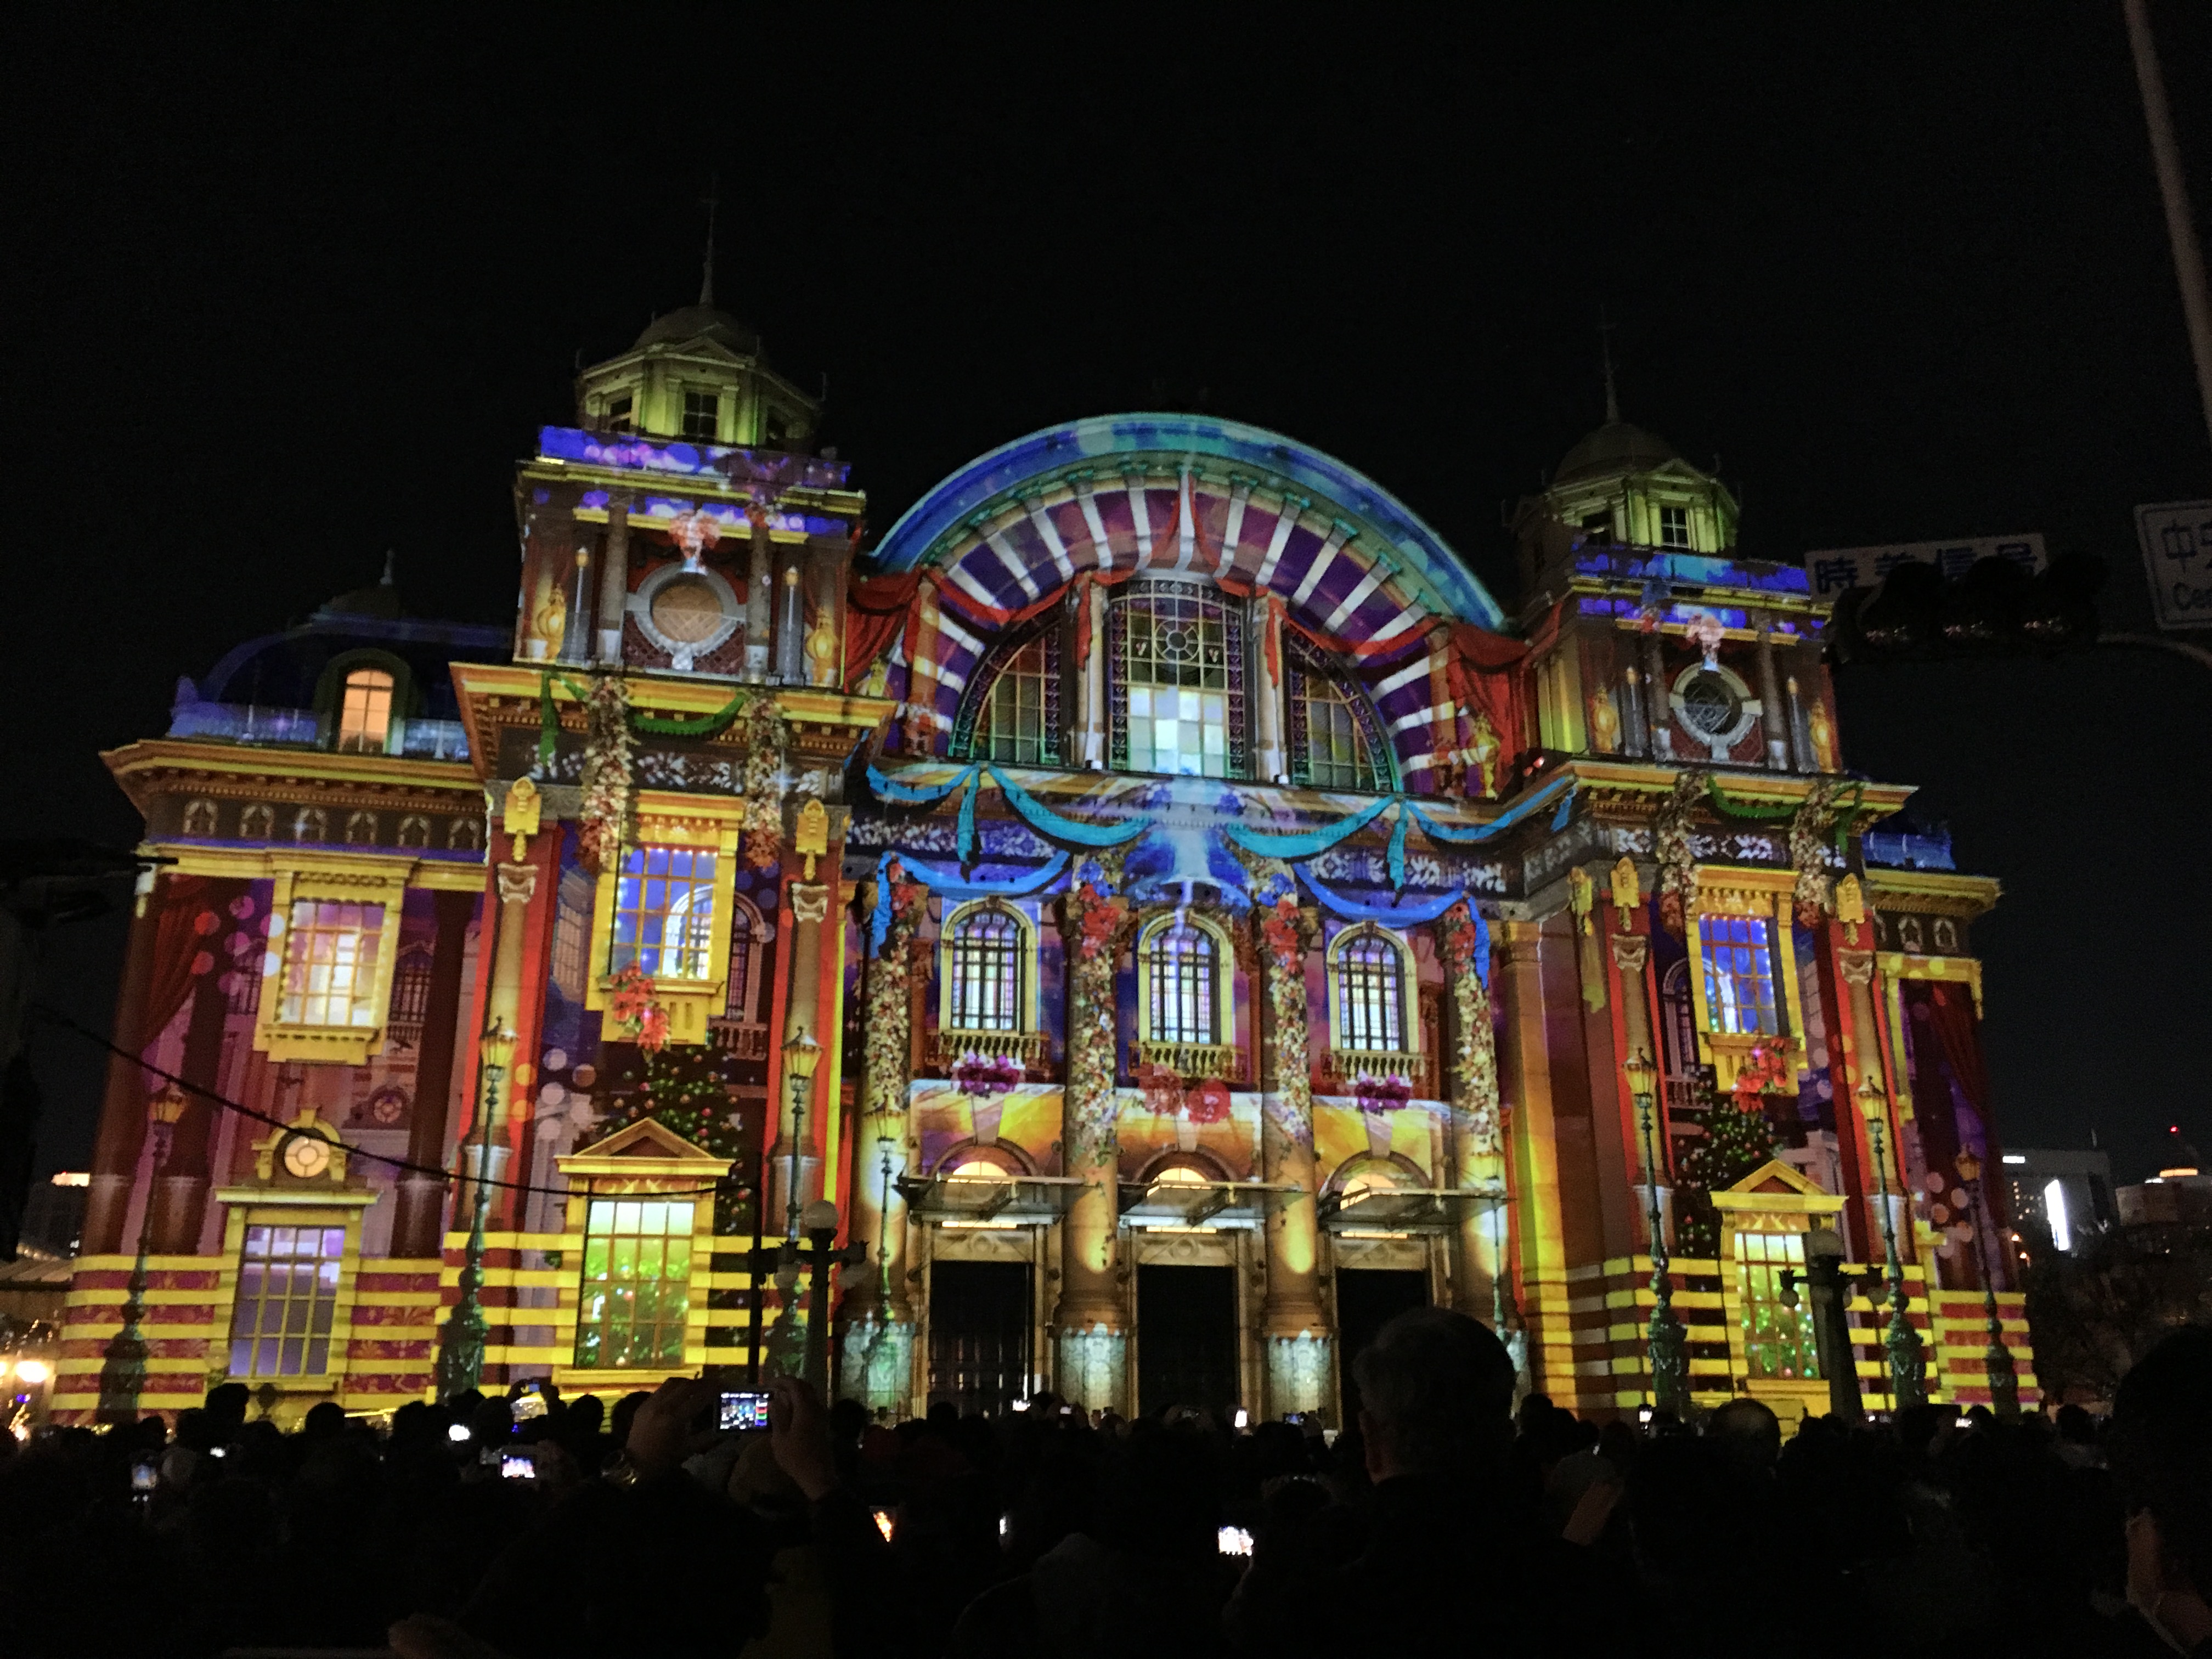 Osaka public hall covered in a 3-D image light show